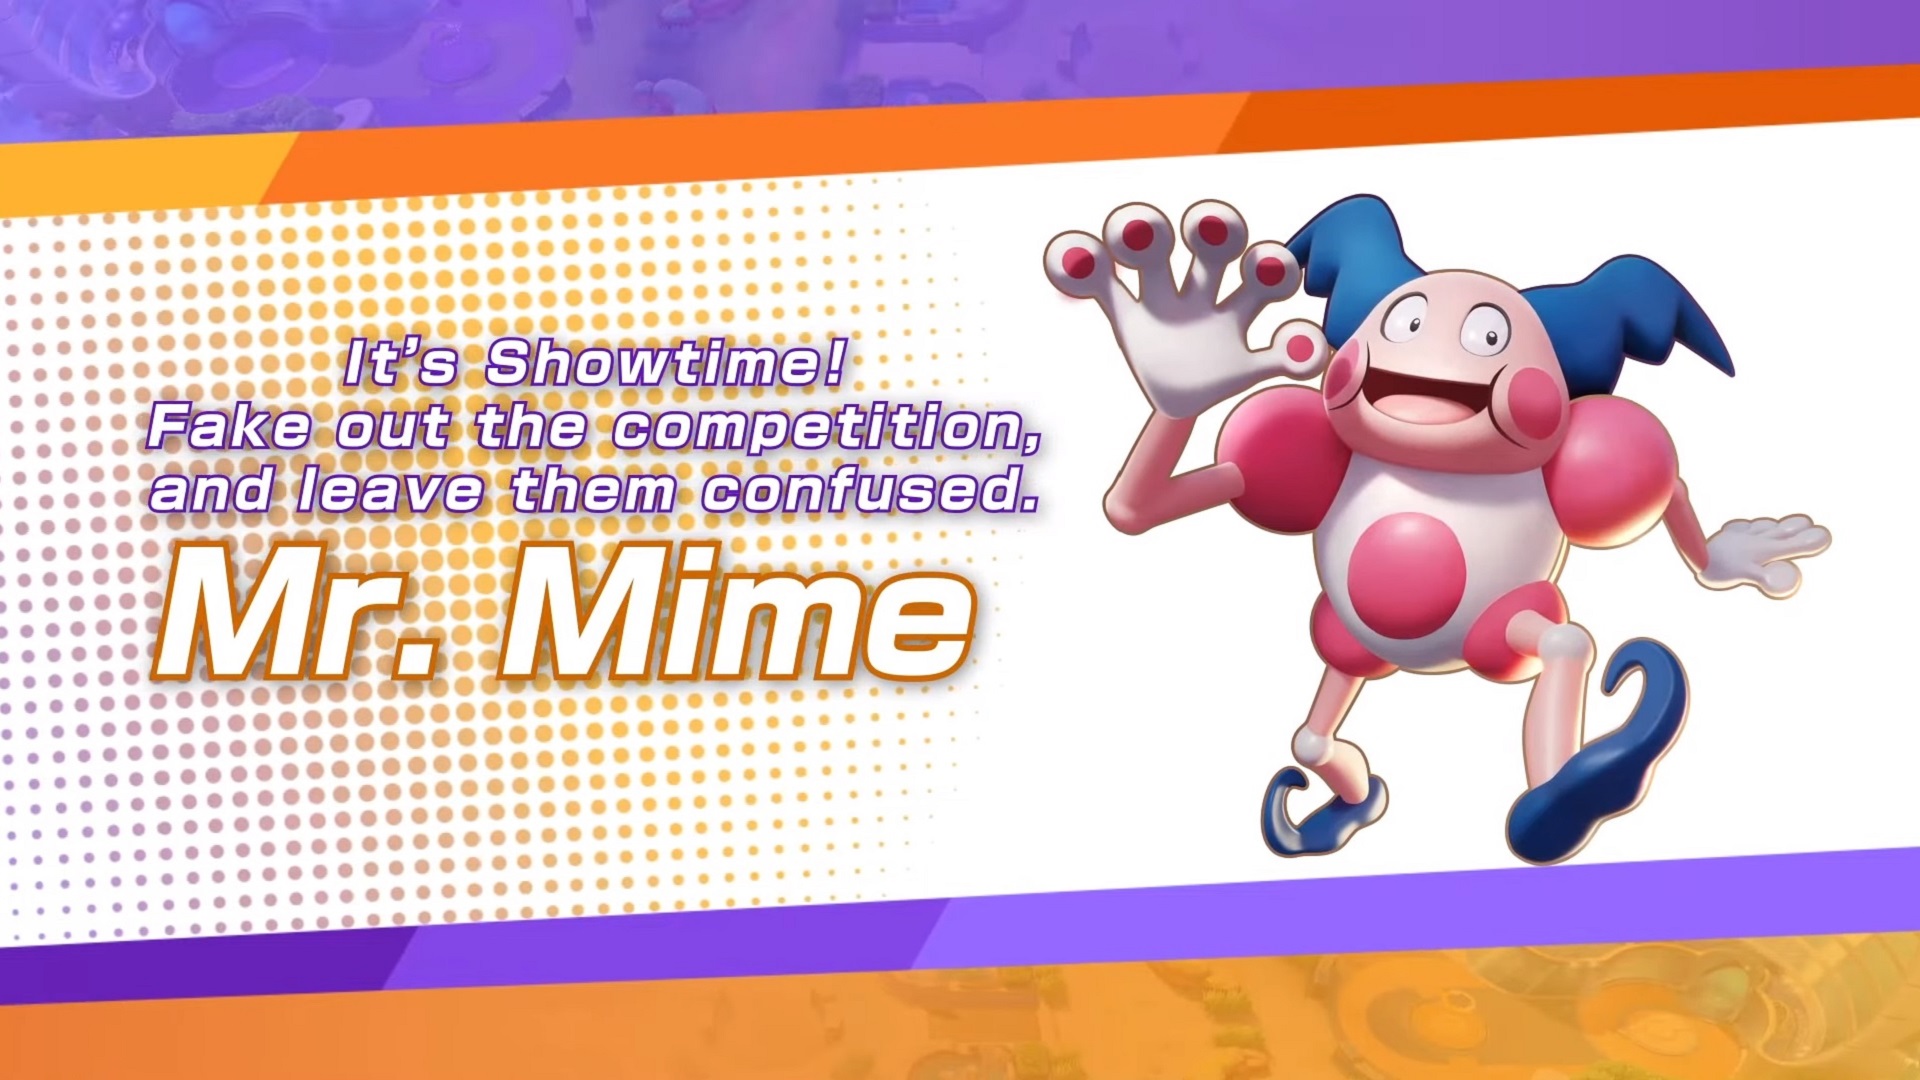  How to play Supporter in Pokémon Unite: Eldegoss, Mr. Mime, Wigglytuff, Blissey, and Hoopa